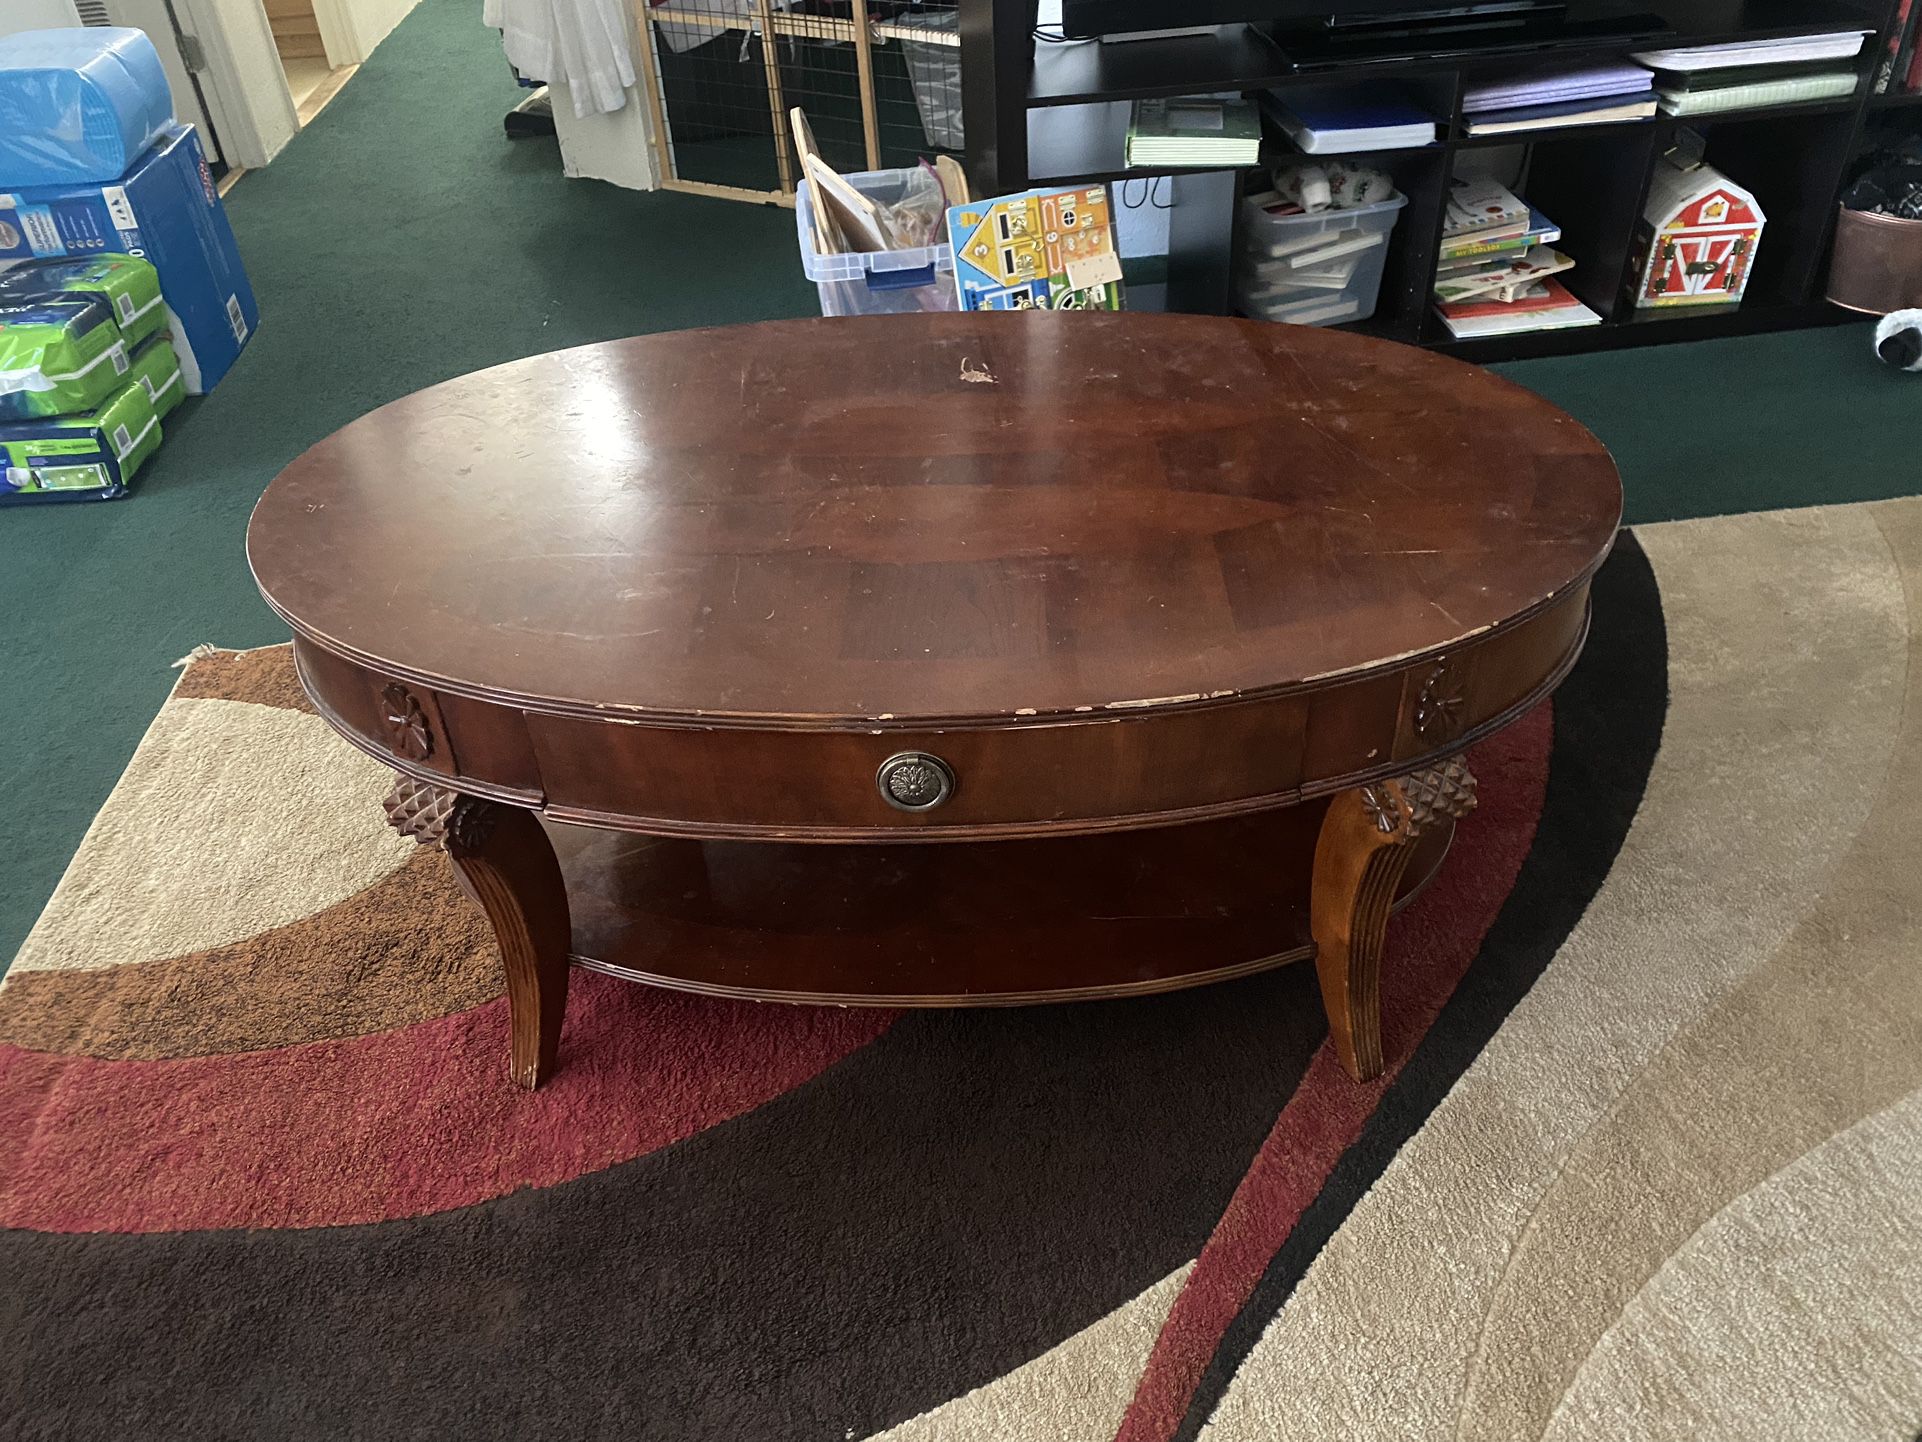 $135-Beautiful  (scratched) coffee table with storage drawer and extra storage shelf underneath  4’ X 2 1/2’ yes it is scratched from use as it is use